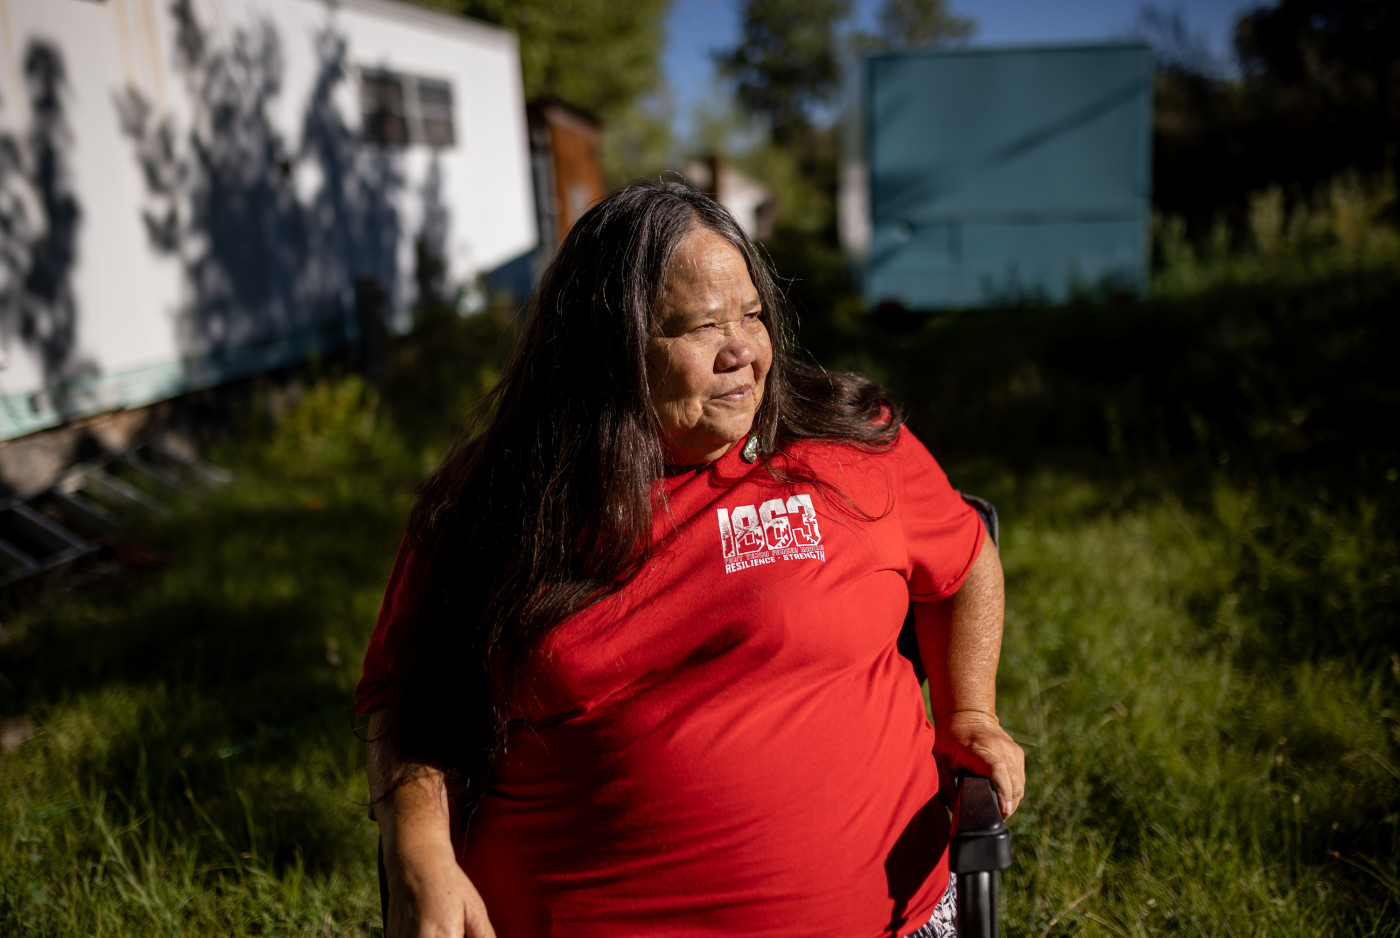 Kathy Jefferson Bancroft, 67, the tribal historic preservation officer for the Lone Pine Paiute-Shoshone Reservation, poses for a photo at her home on the reservation near Lone Pine, California, on Friday, Aug. 12, 2022. Spenser Heaps, Deseret News